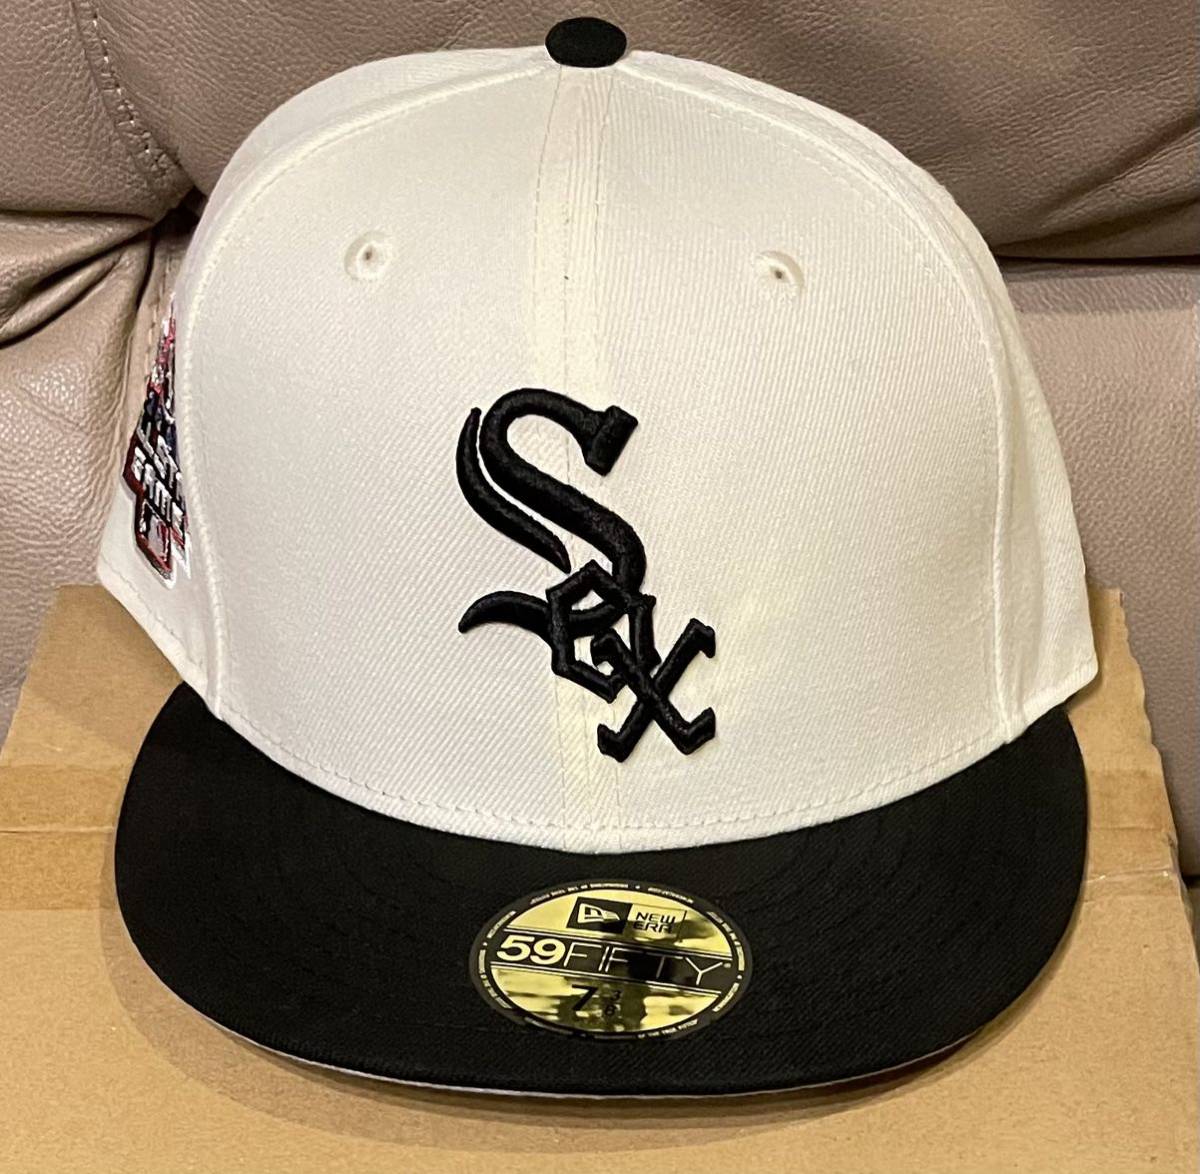 NEW ERA CHICAGO WHITE SOX 59FIFTY FITTED CAP 7 3/8 58.7cmシカゴ ホワイトソックス　CUSTOM SIDE PATCH CHROME WHITE BLACK